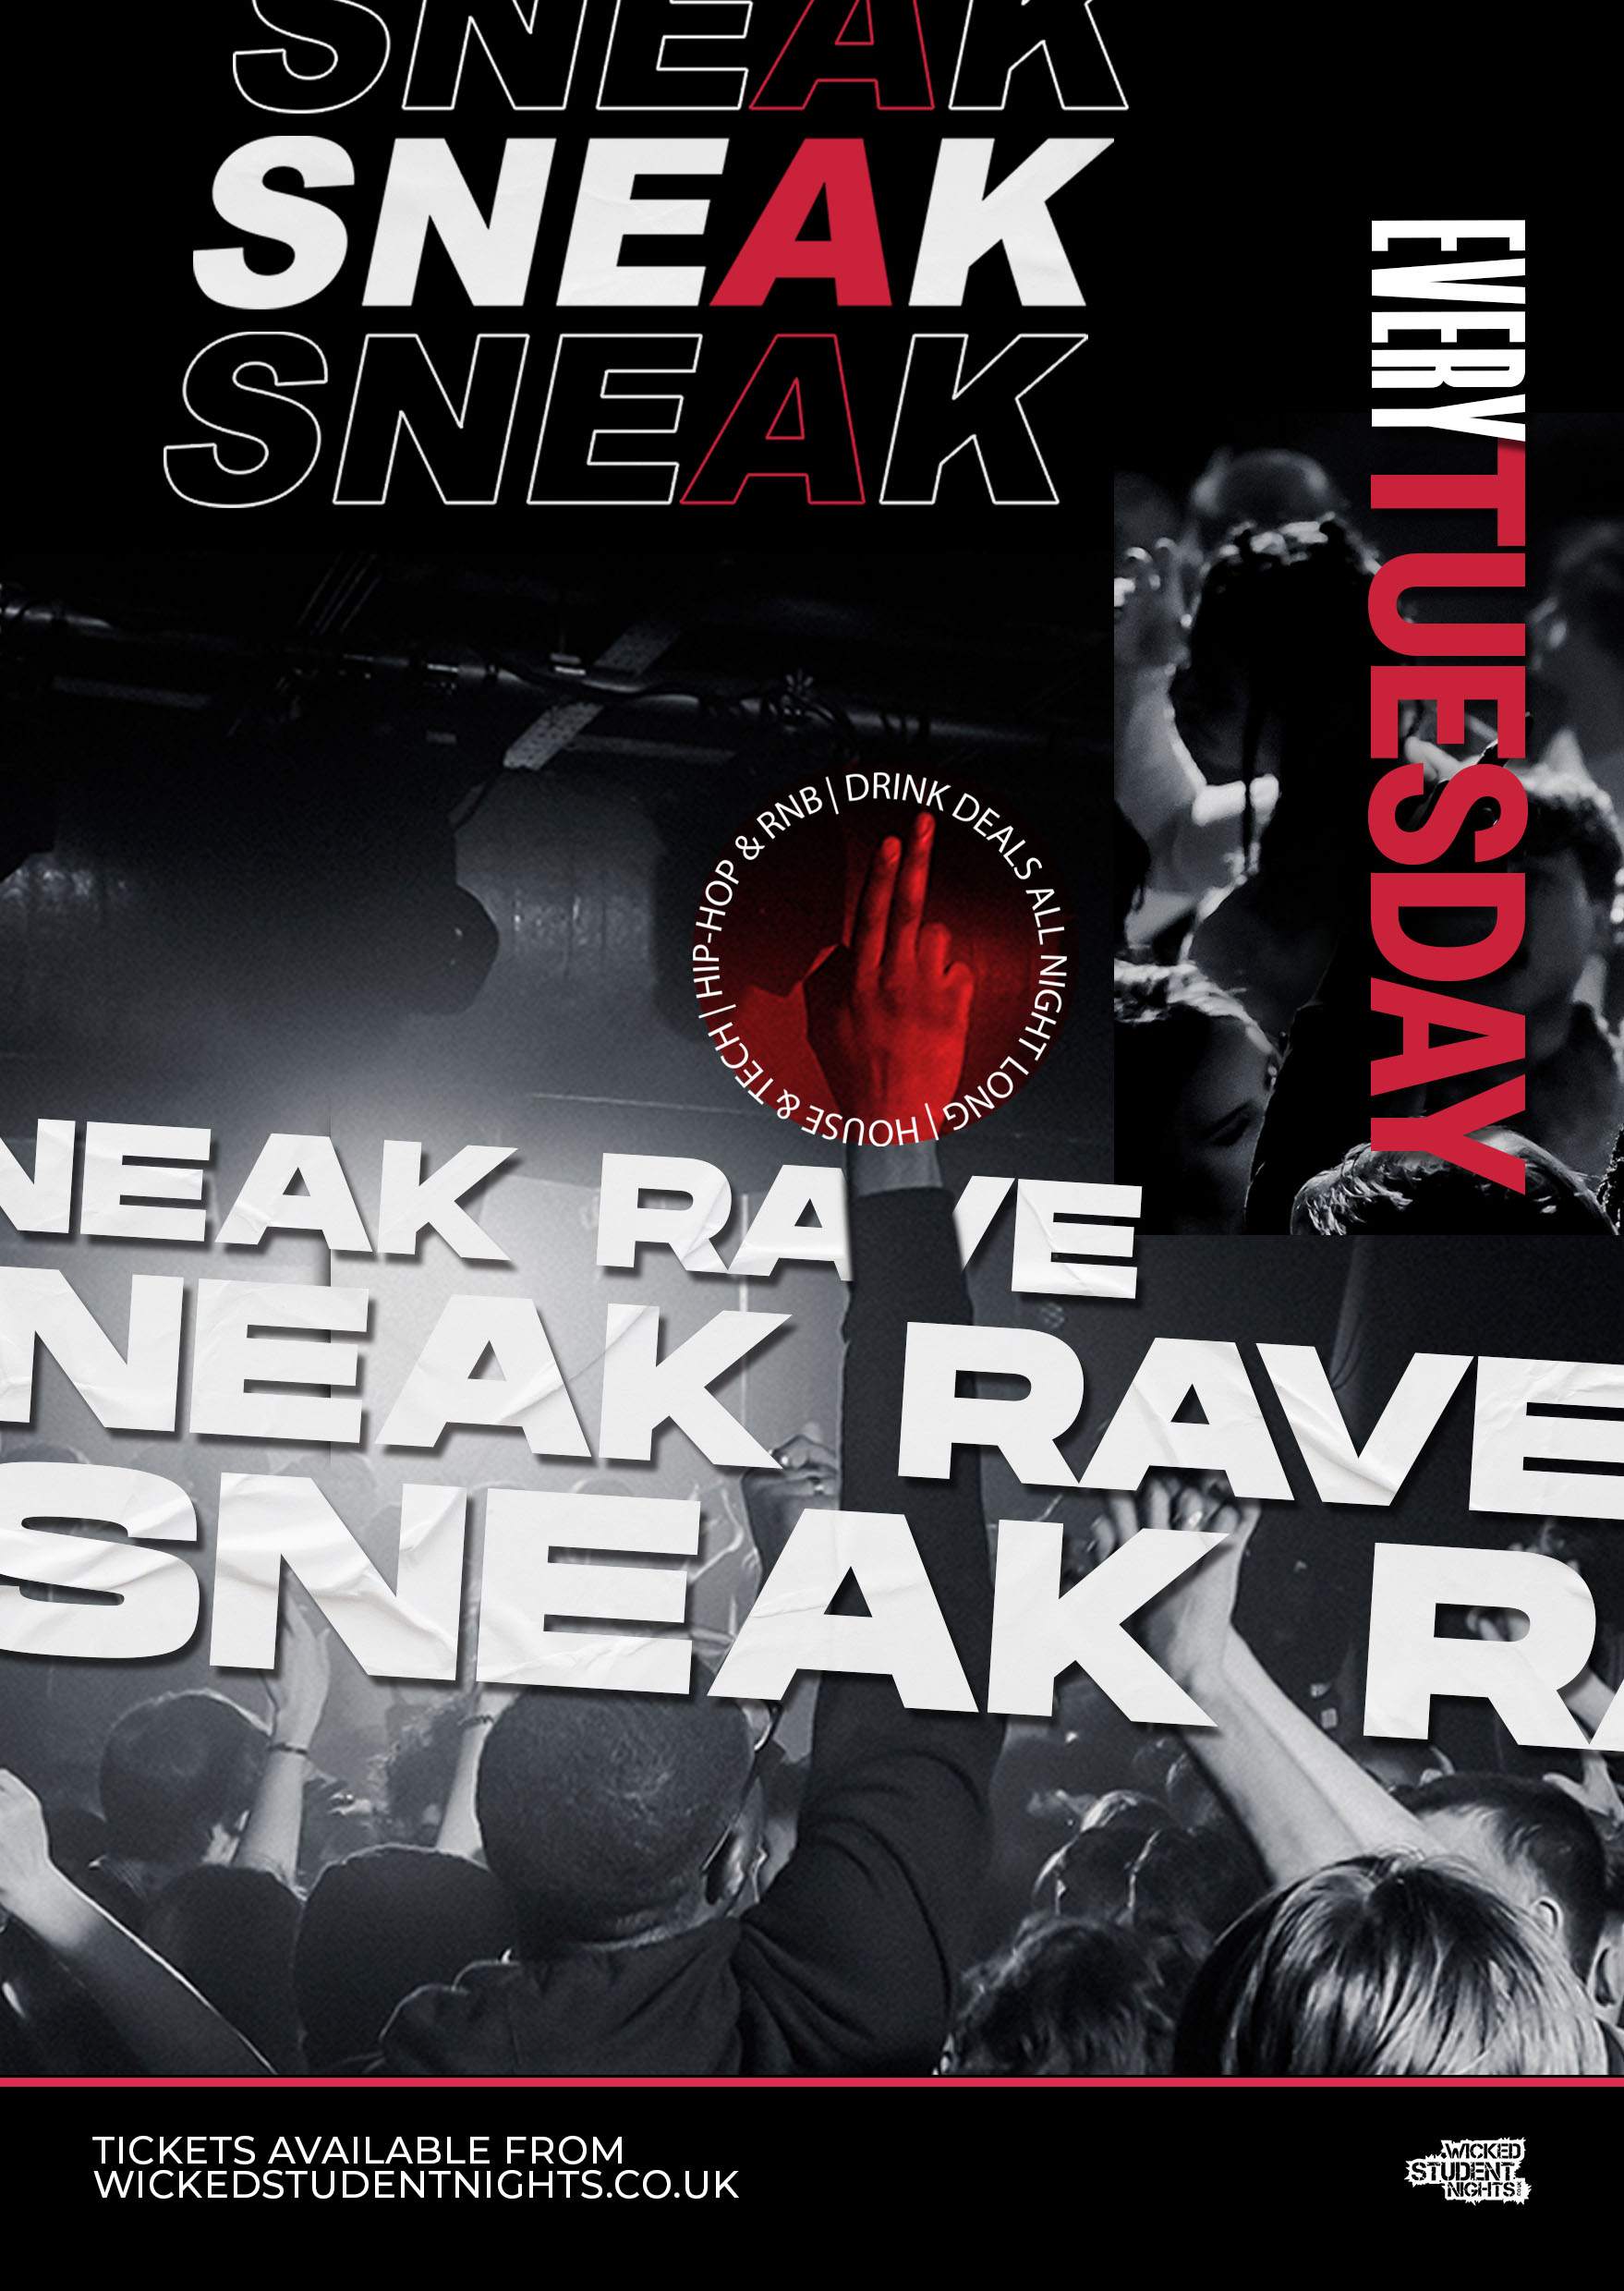 SNEAK TUESDAY RAVE // £2.50 DRINKS - フライヤー表